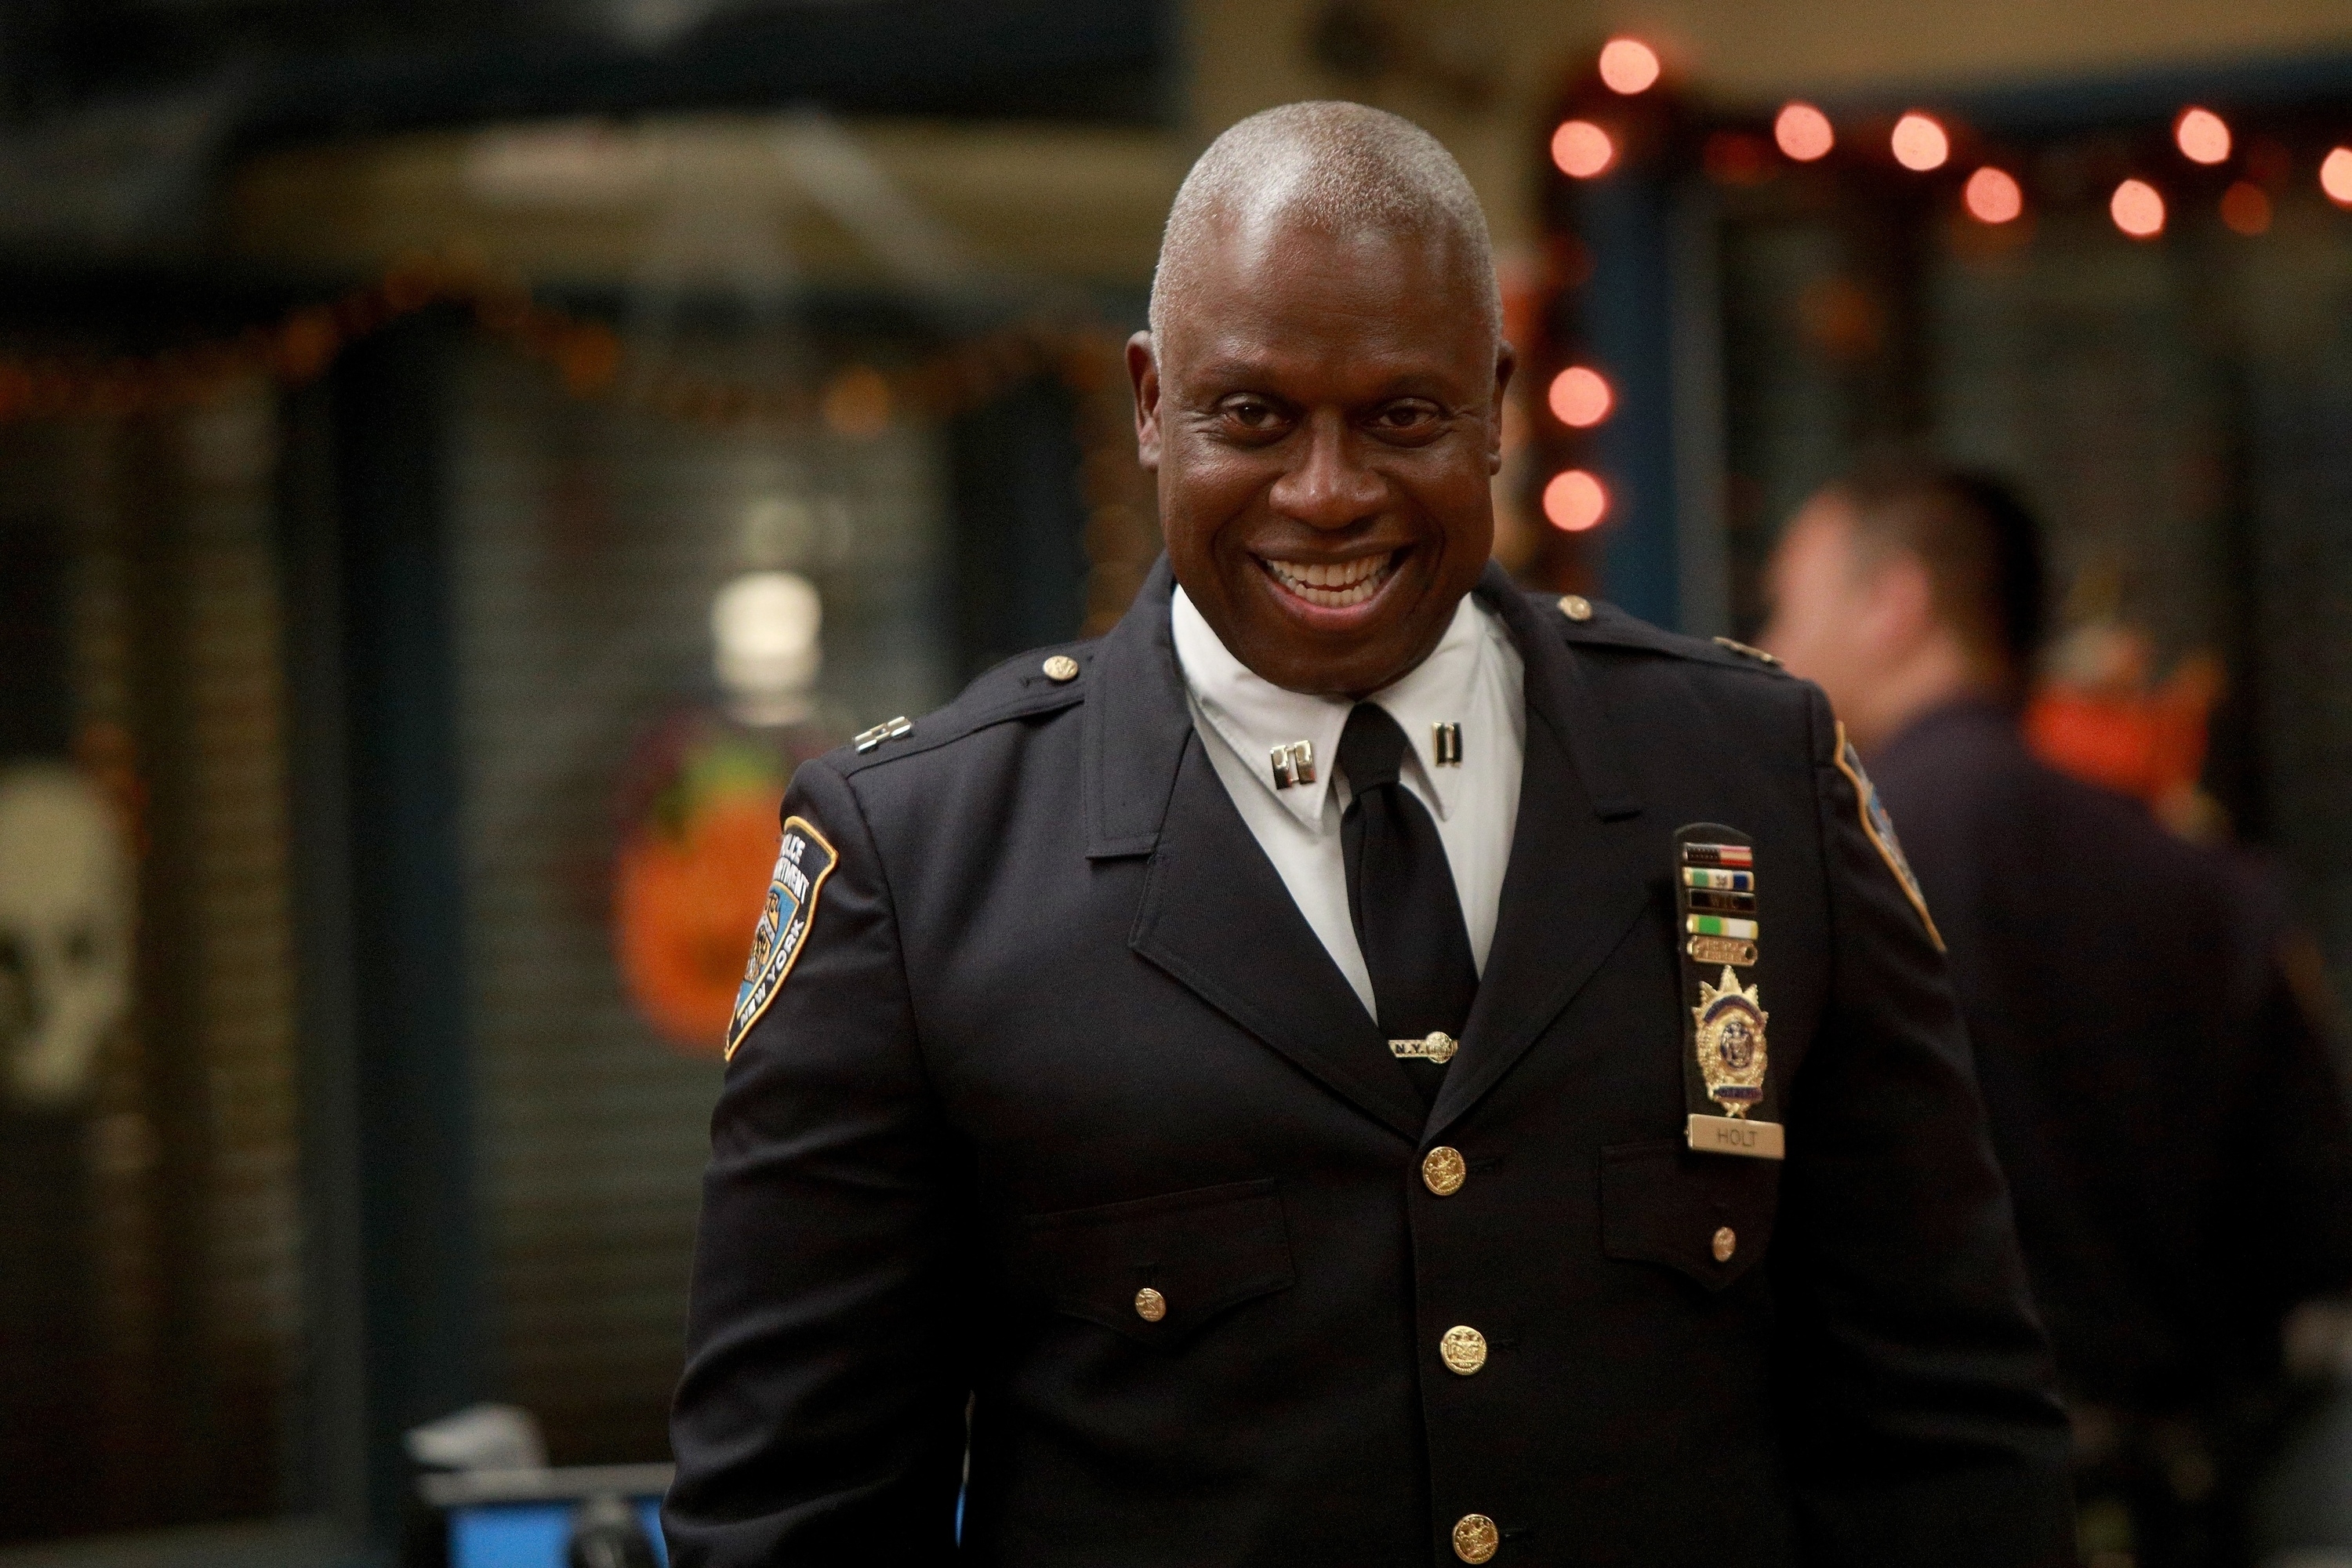 Andre Braugher gives off a mischievous grin